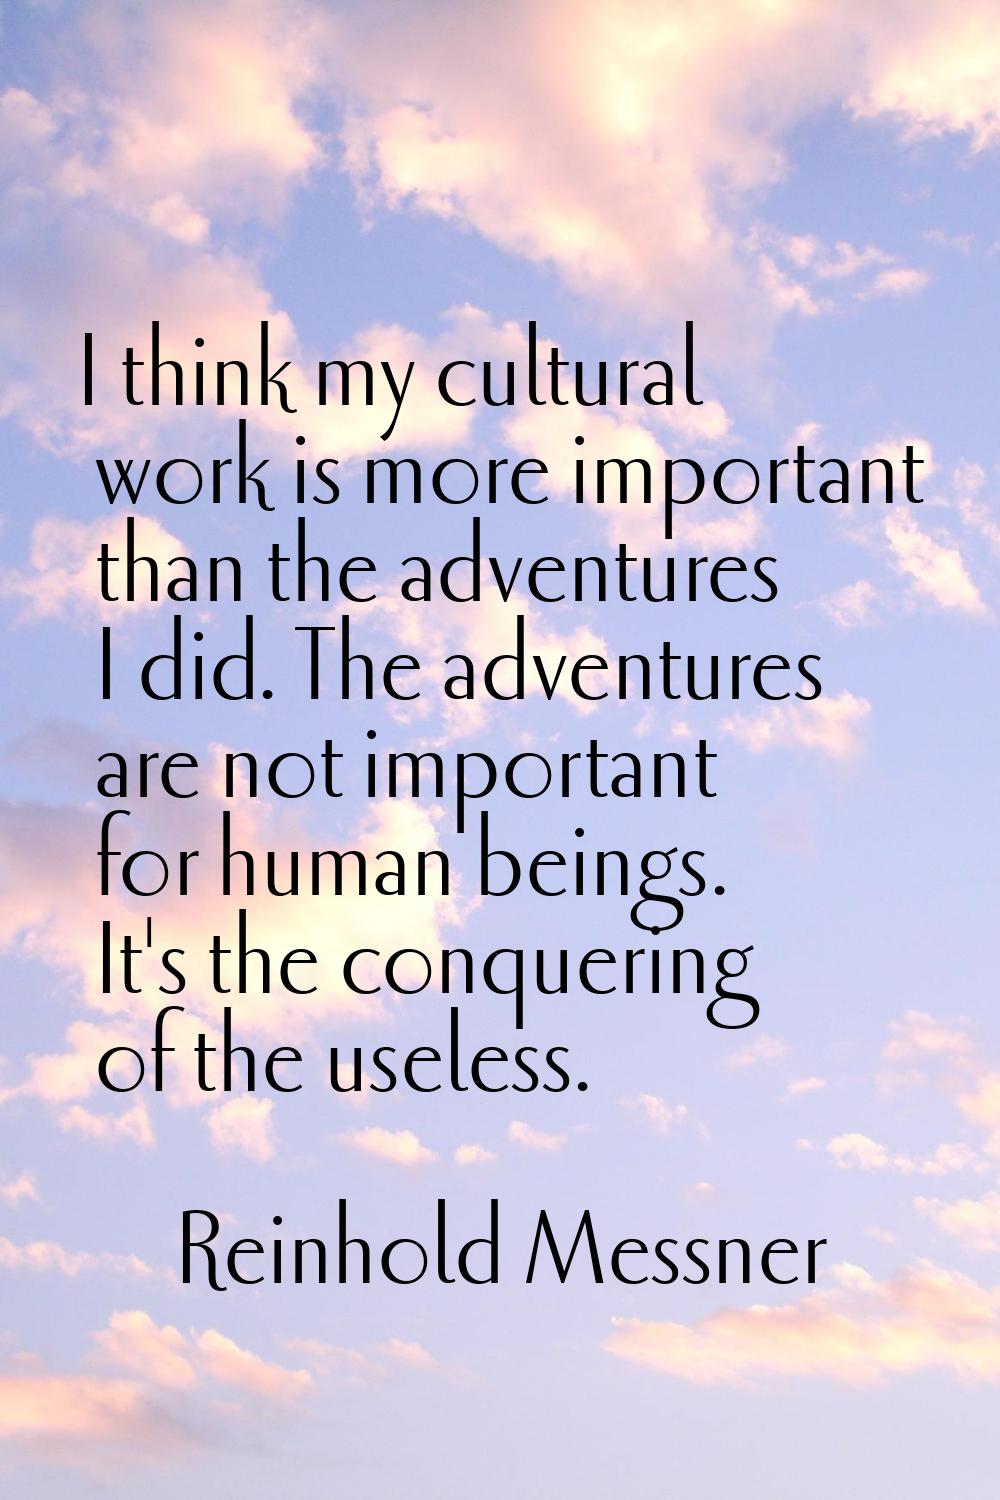 I think my cultural work is more important than the adventures I did. The adventures are not import